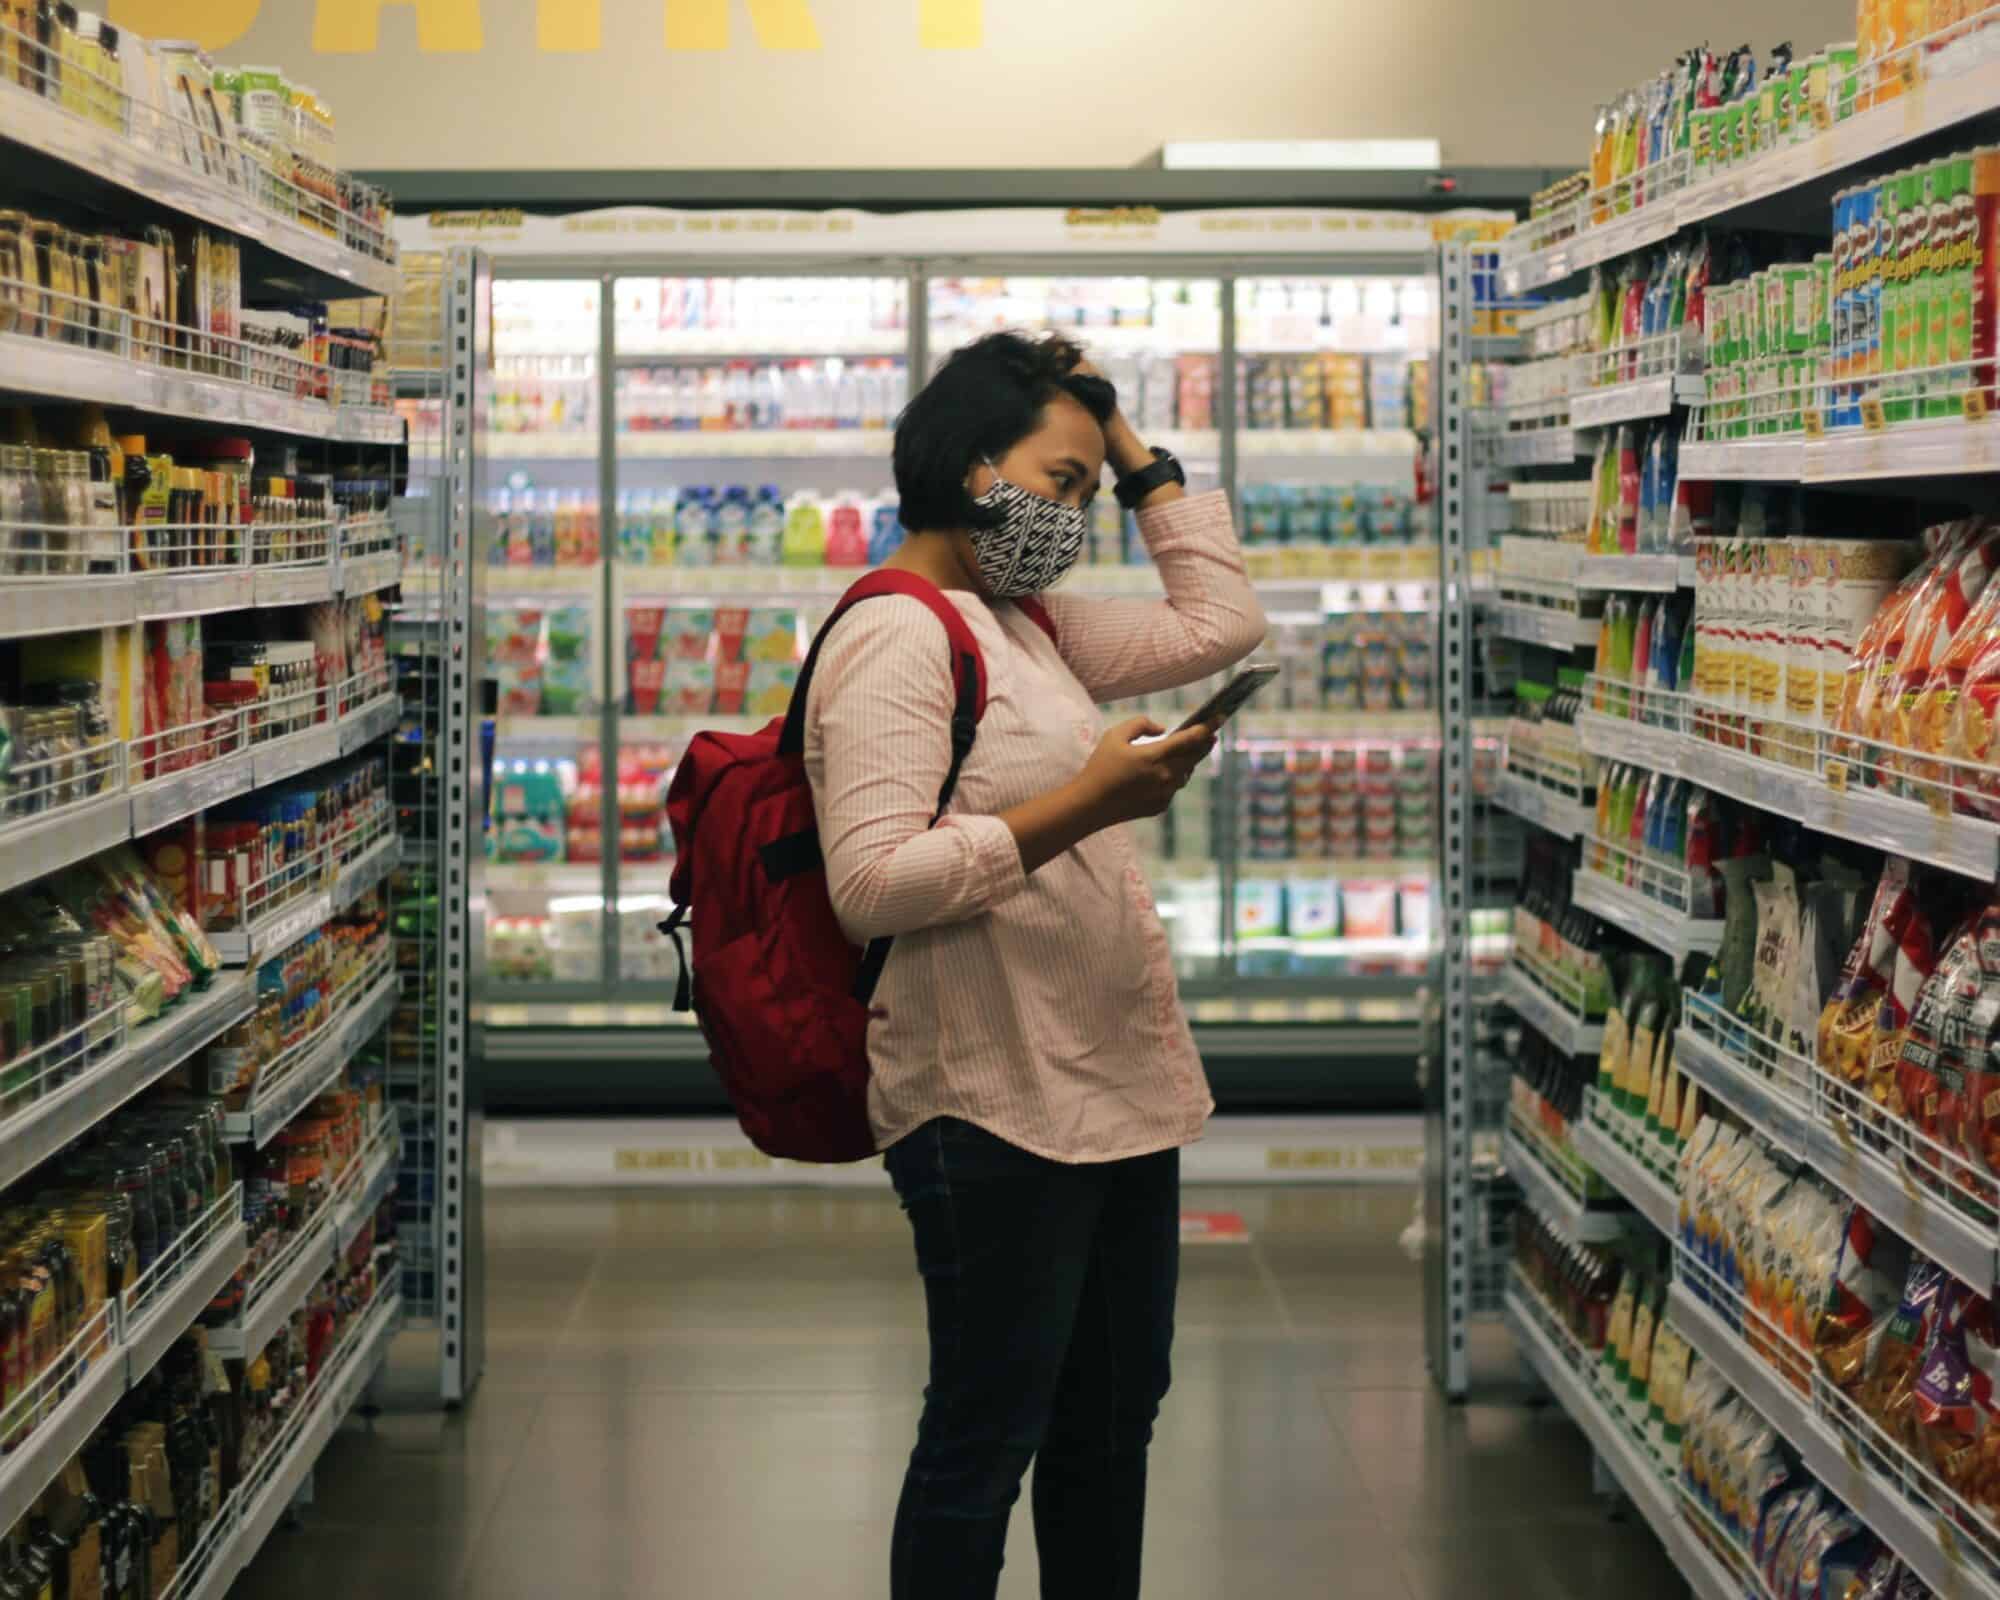 A masked woman looks distressed in the middle of a grocery aisle.